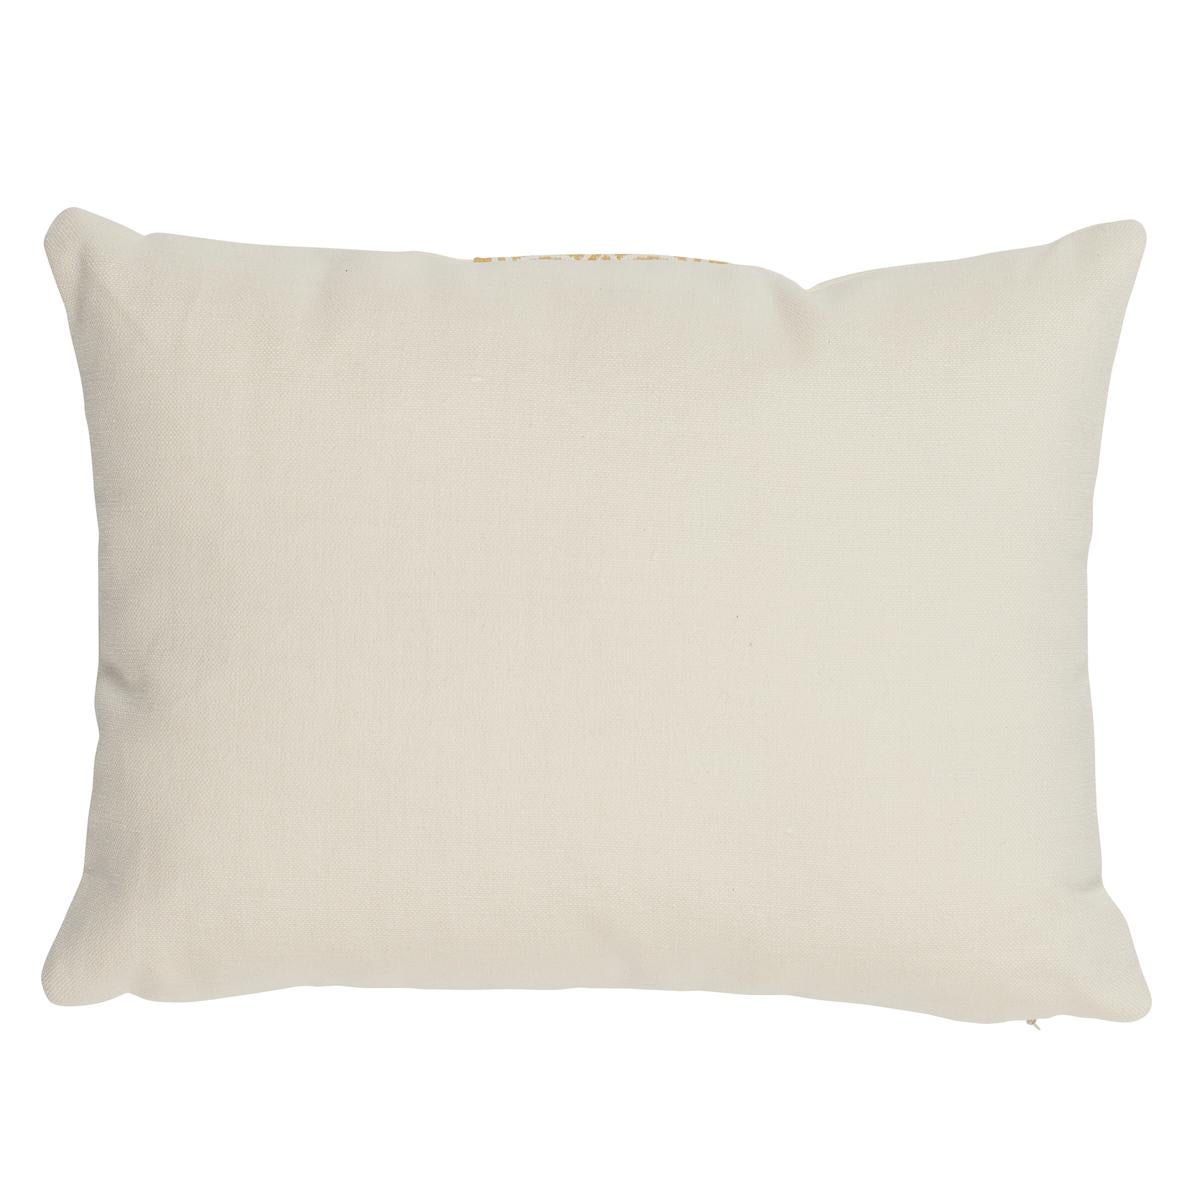 This pillow features Infinito Indoor/Outdoor Trim with a knife edge finish. With its interesting, interlocking loop motif, Infinito Indoor/Outdoor Trim is a versatile, transitional trim that is as stylish as it is practical. Body of pillow is